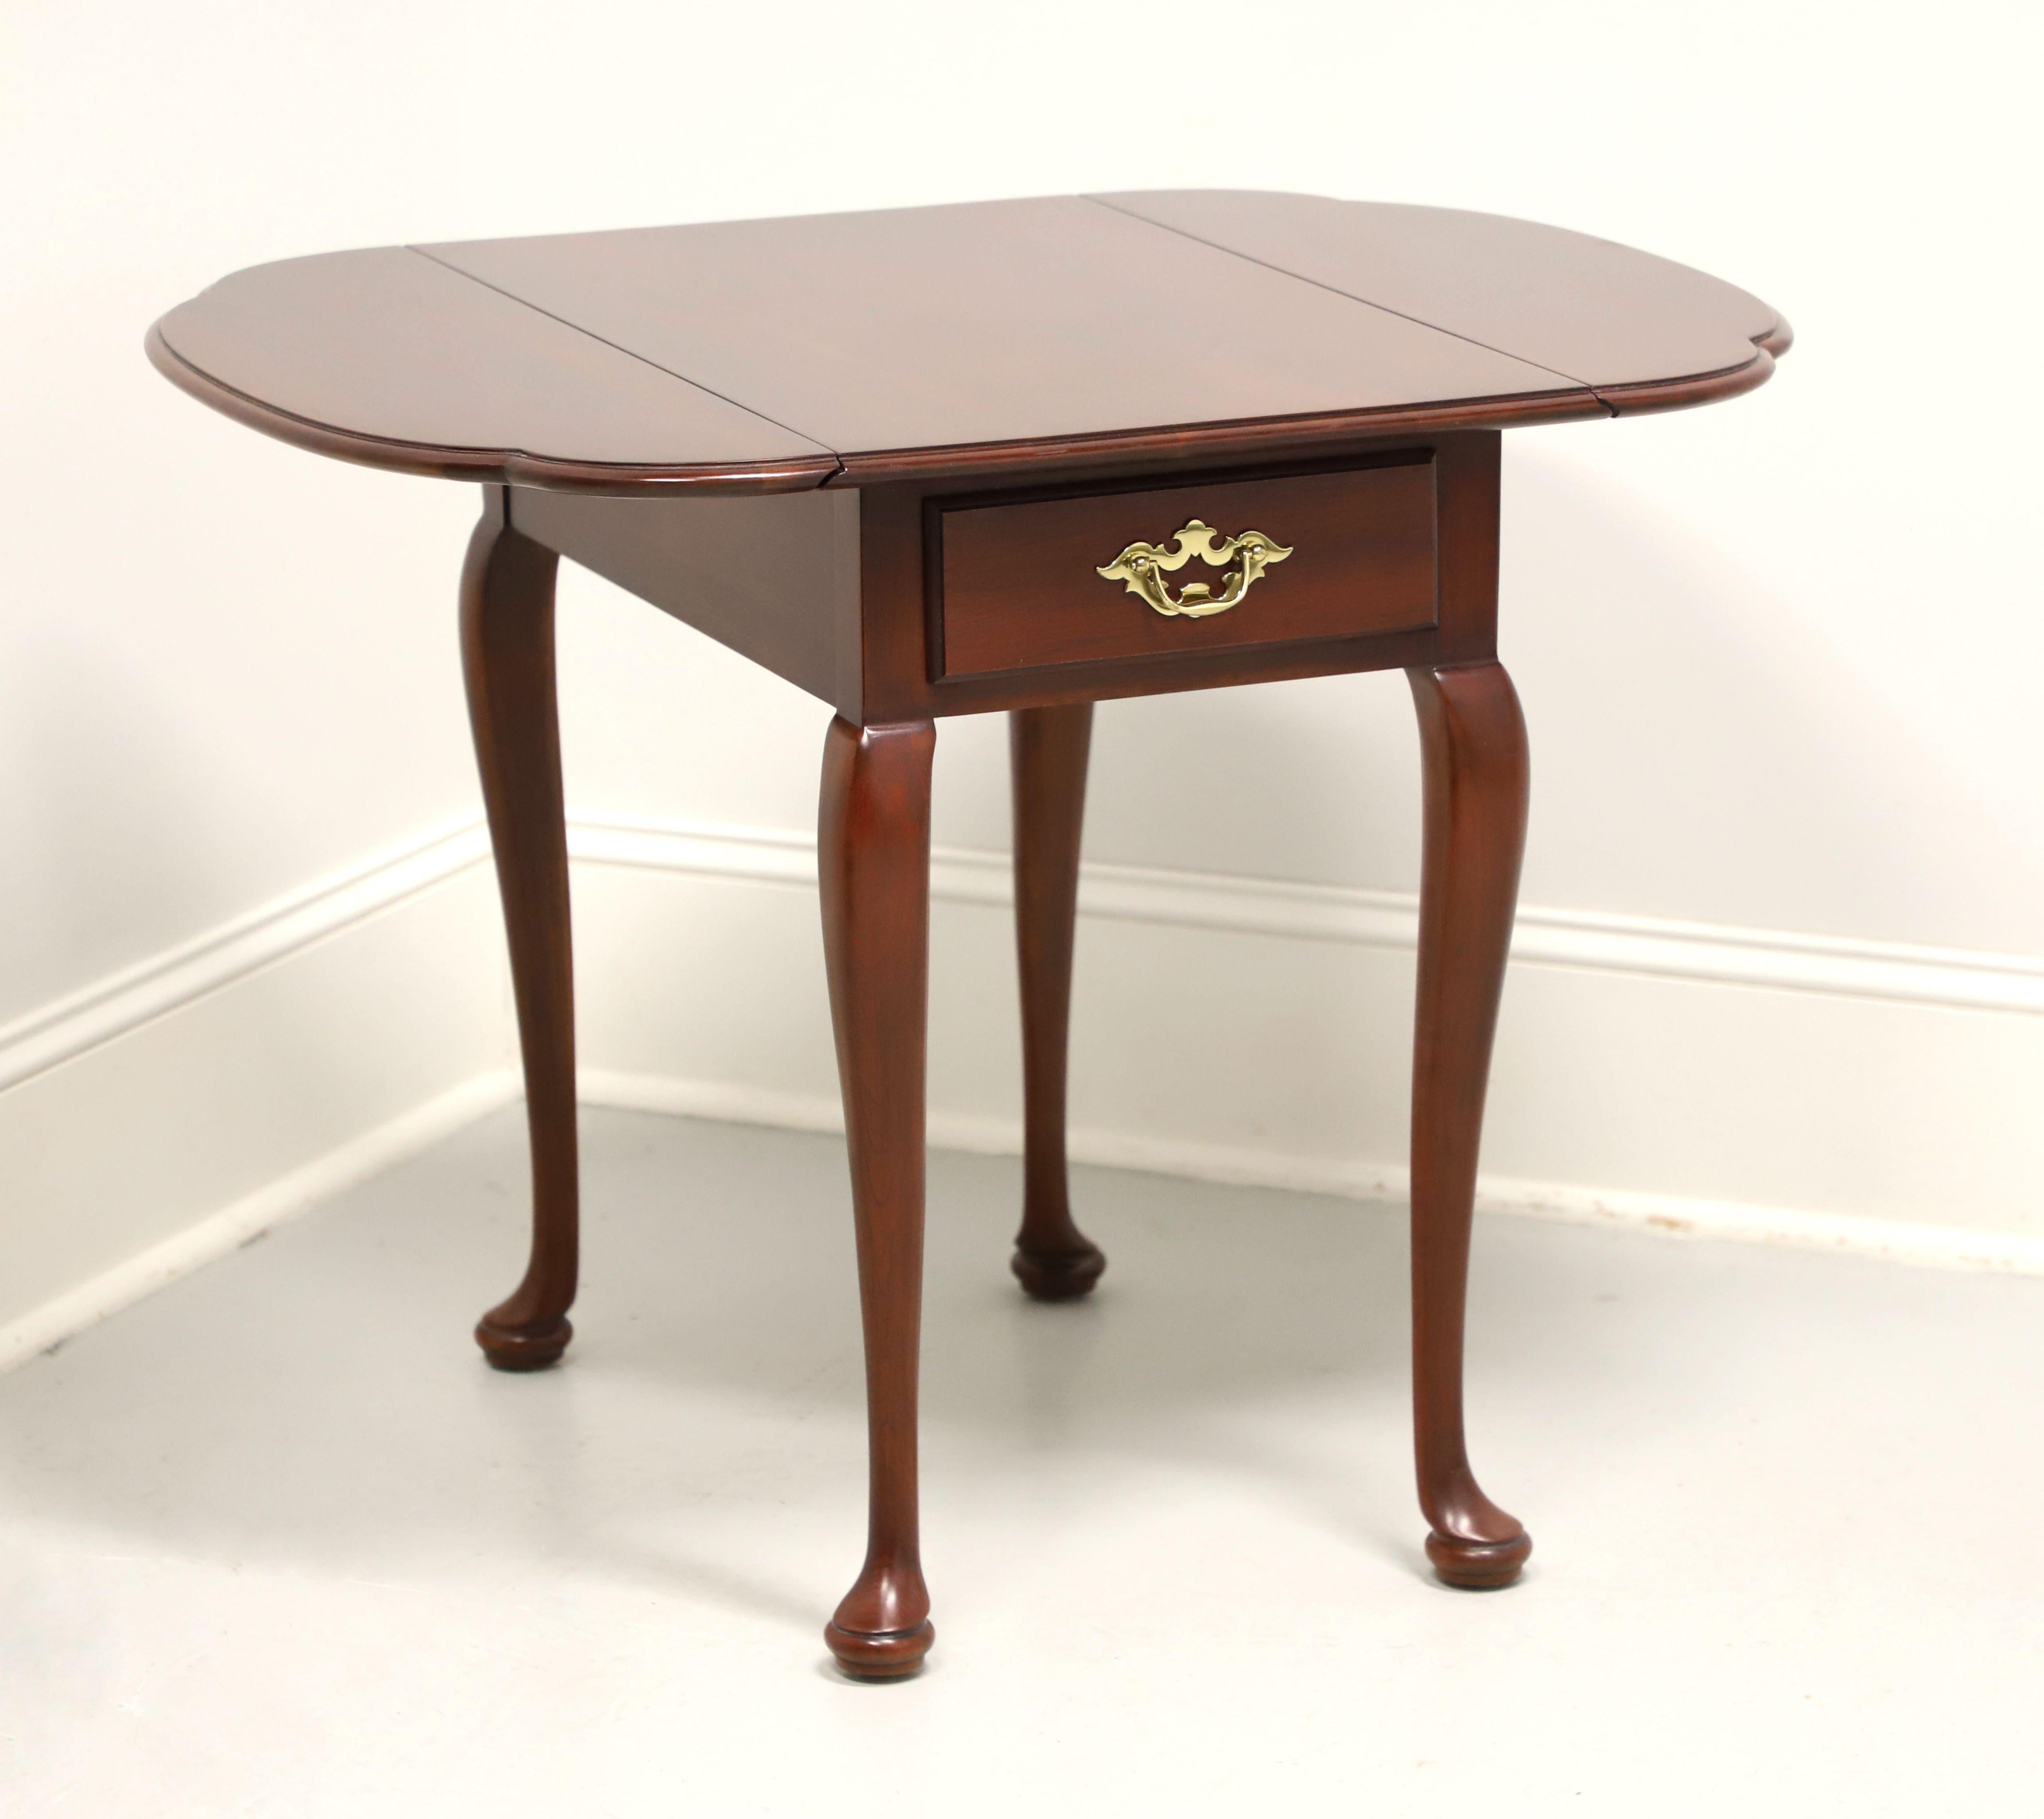 A Queen Anne style drop-leaf side table by Statton Furniture, from their Trutype Americana line. Solid cherry wood with their Centennial finish, brass hardware, bevel edge top, cabriole legs and pad feet. Features rounded edge drop leaves and one